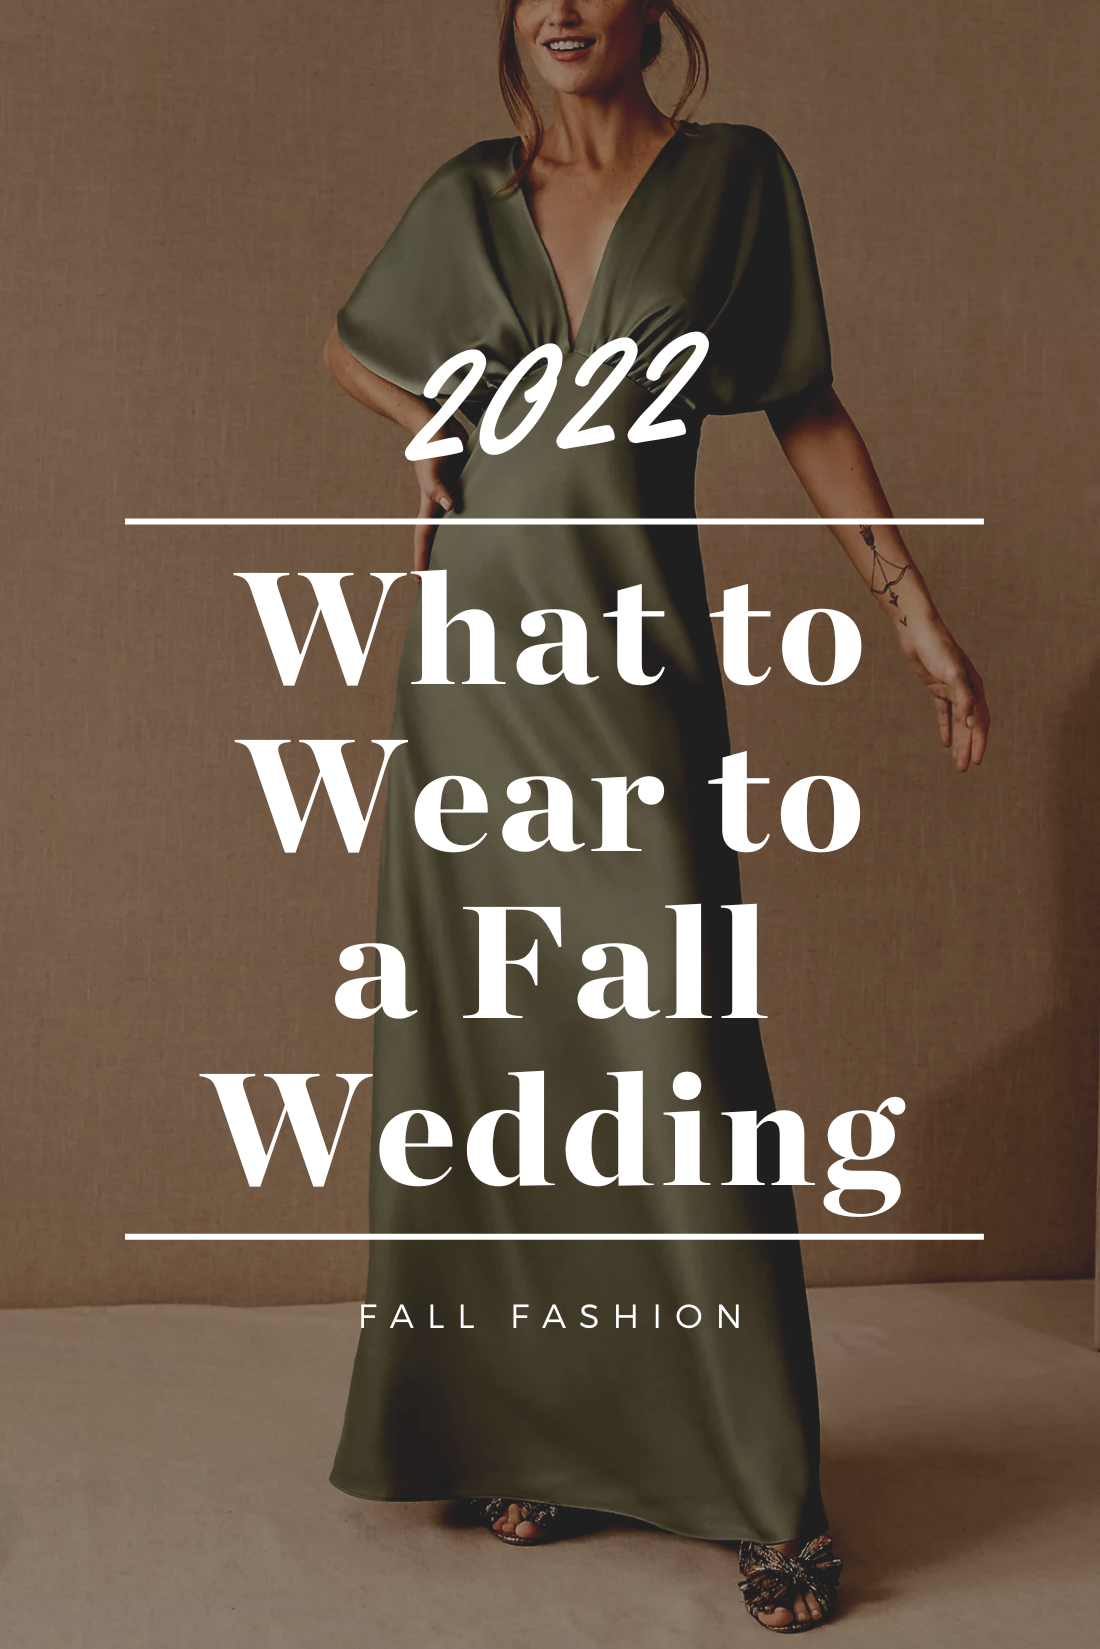 fall wedding guest dresses: what to wear to a fall wedding 2022